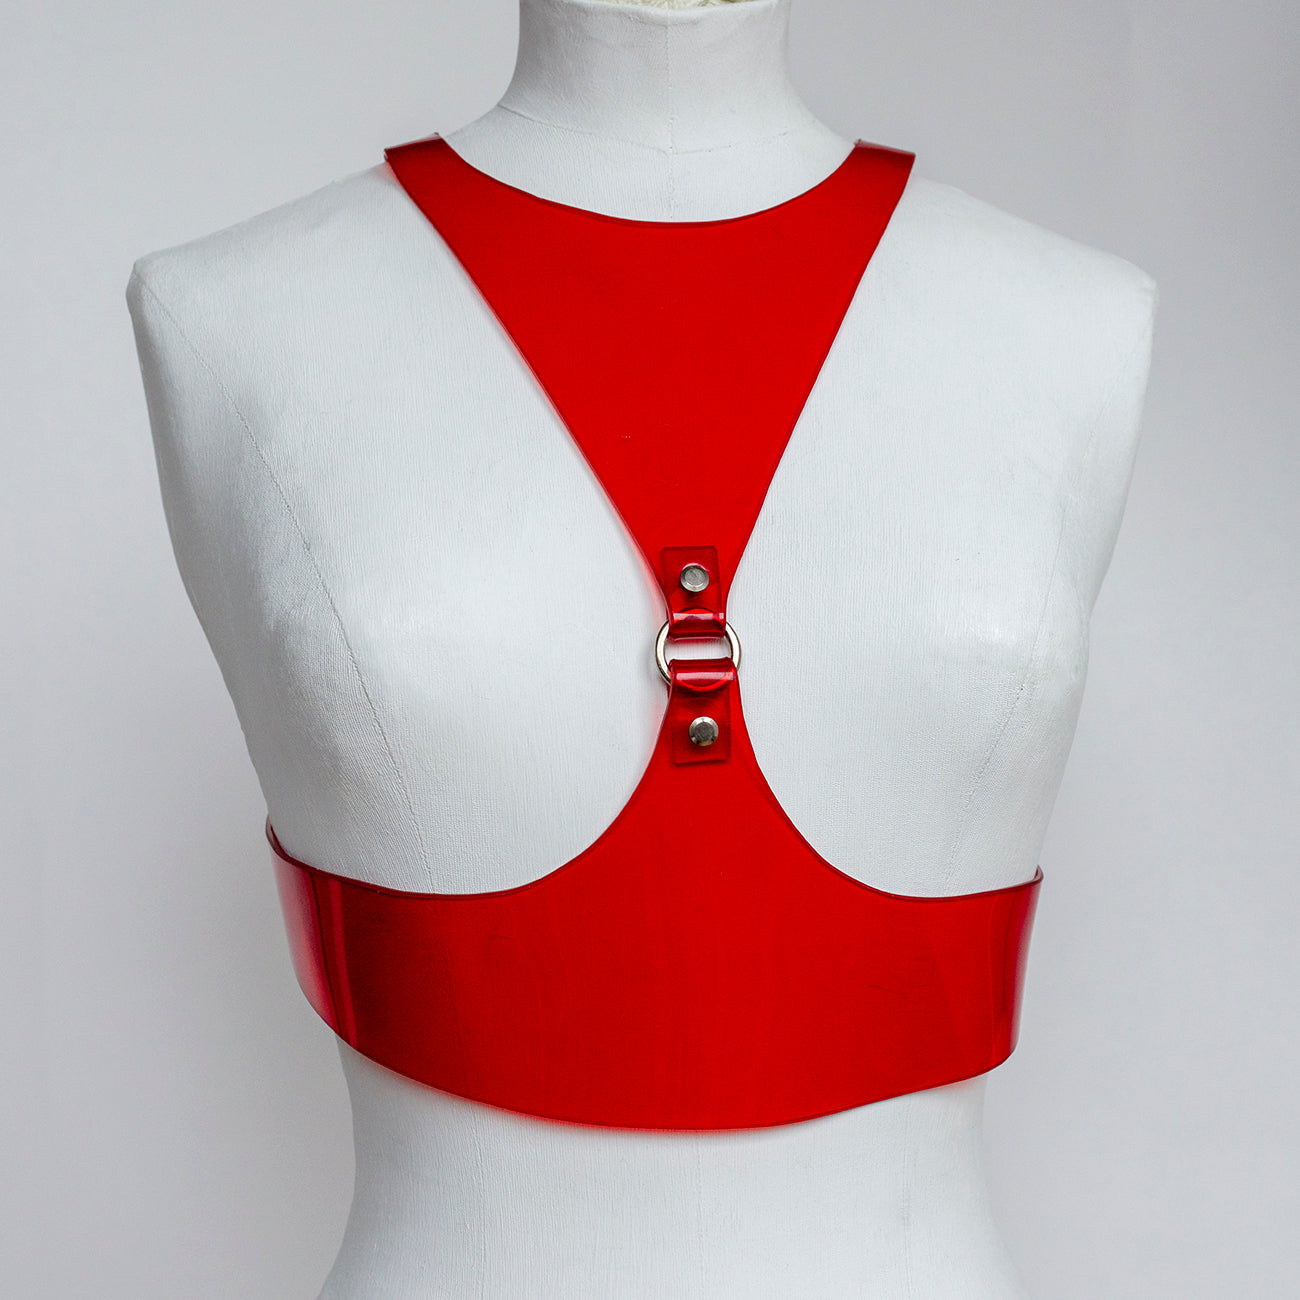 ARCHIVAL PVC TRIANGLE PIECE HARNESS RED S